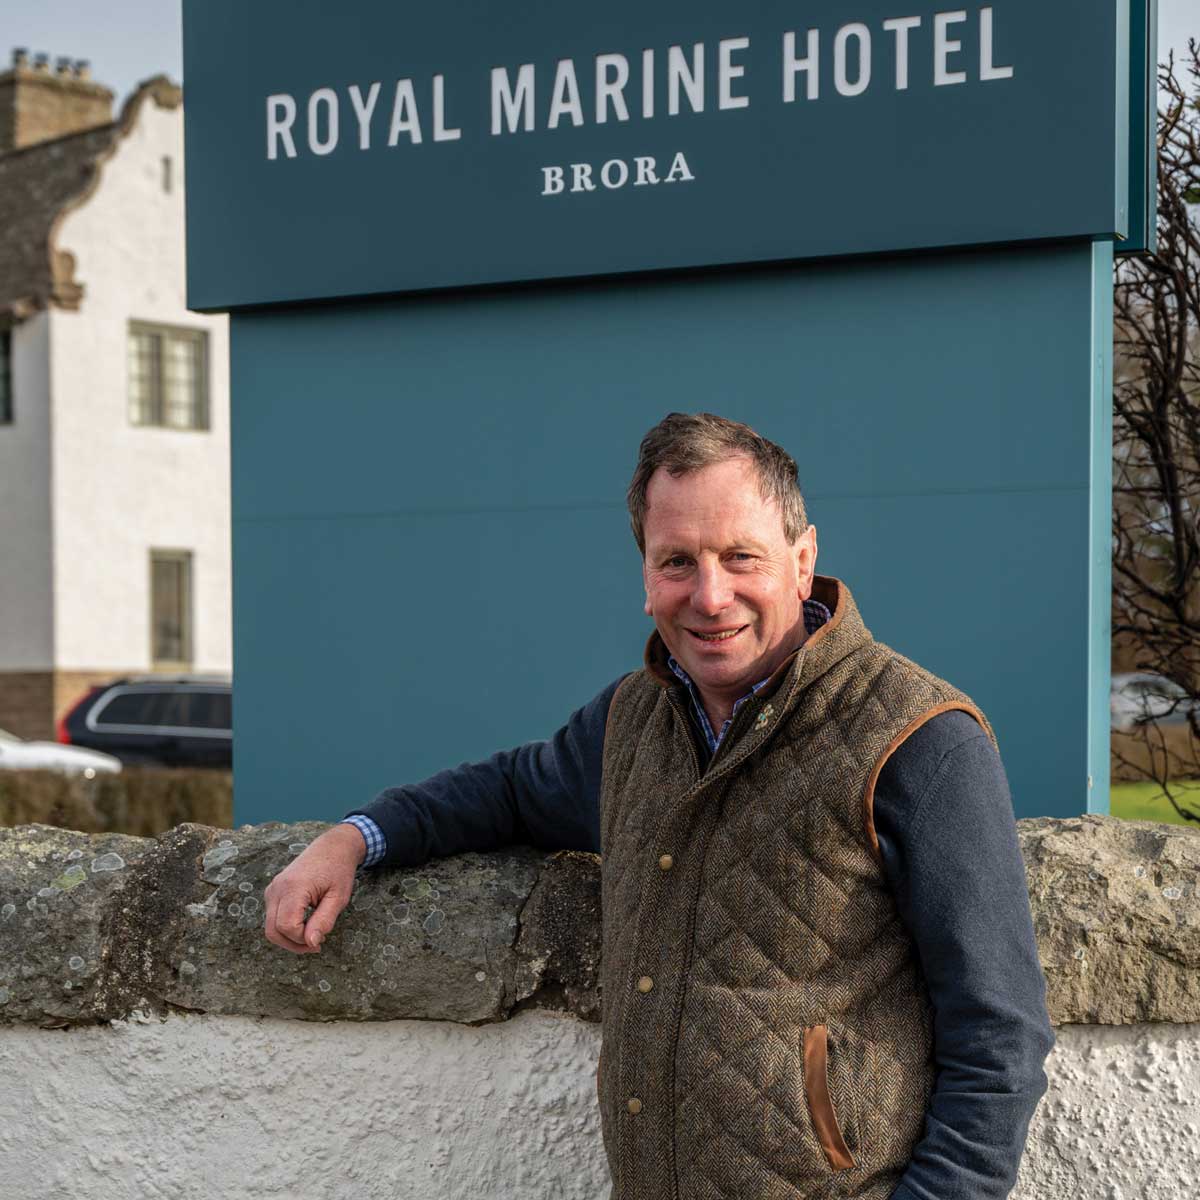 David Whiteford stands outside the royal marine hotel